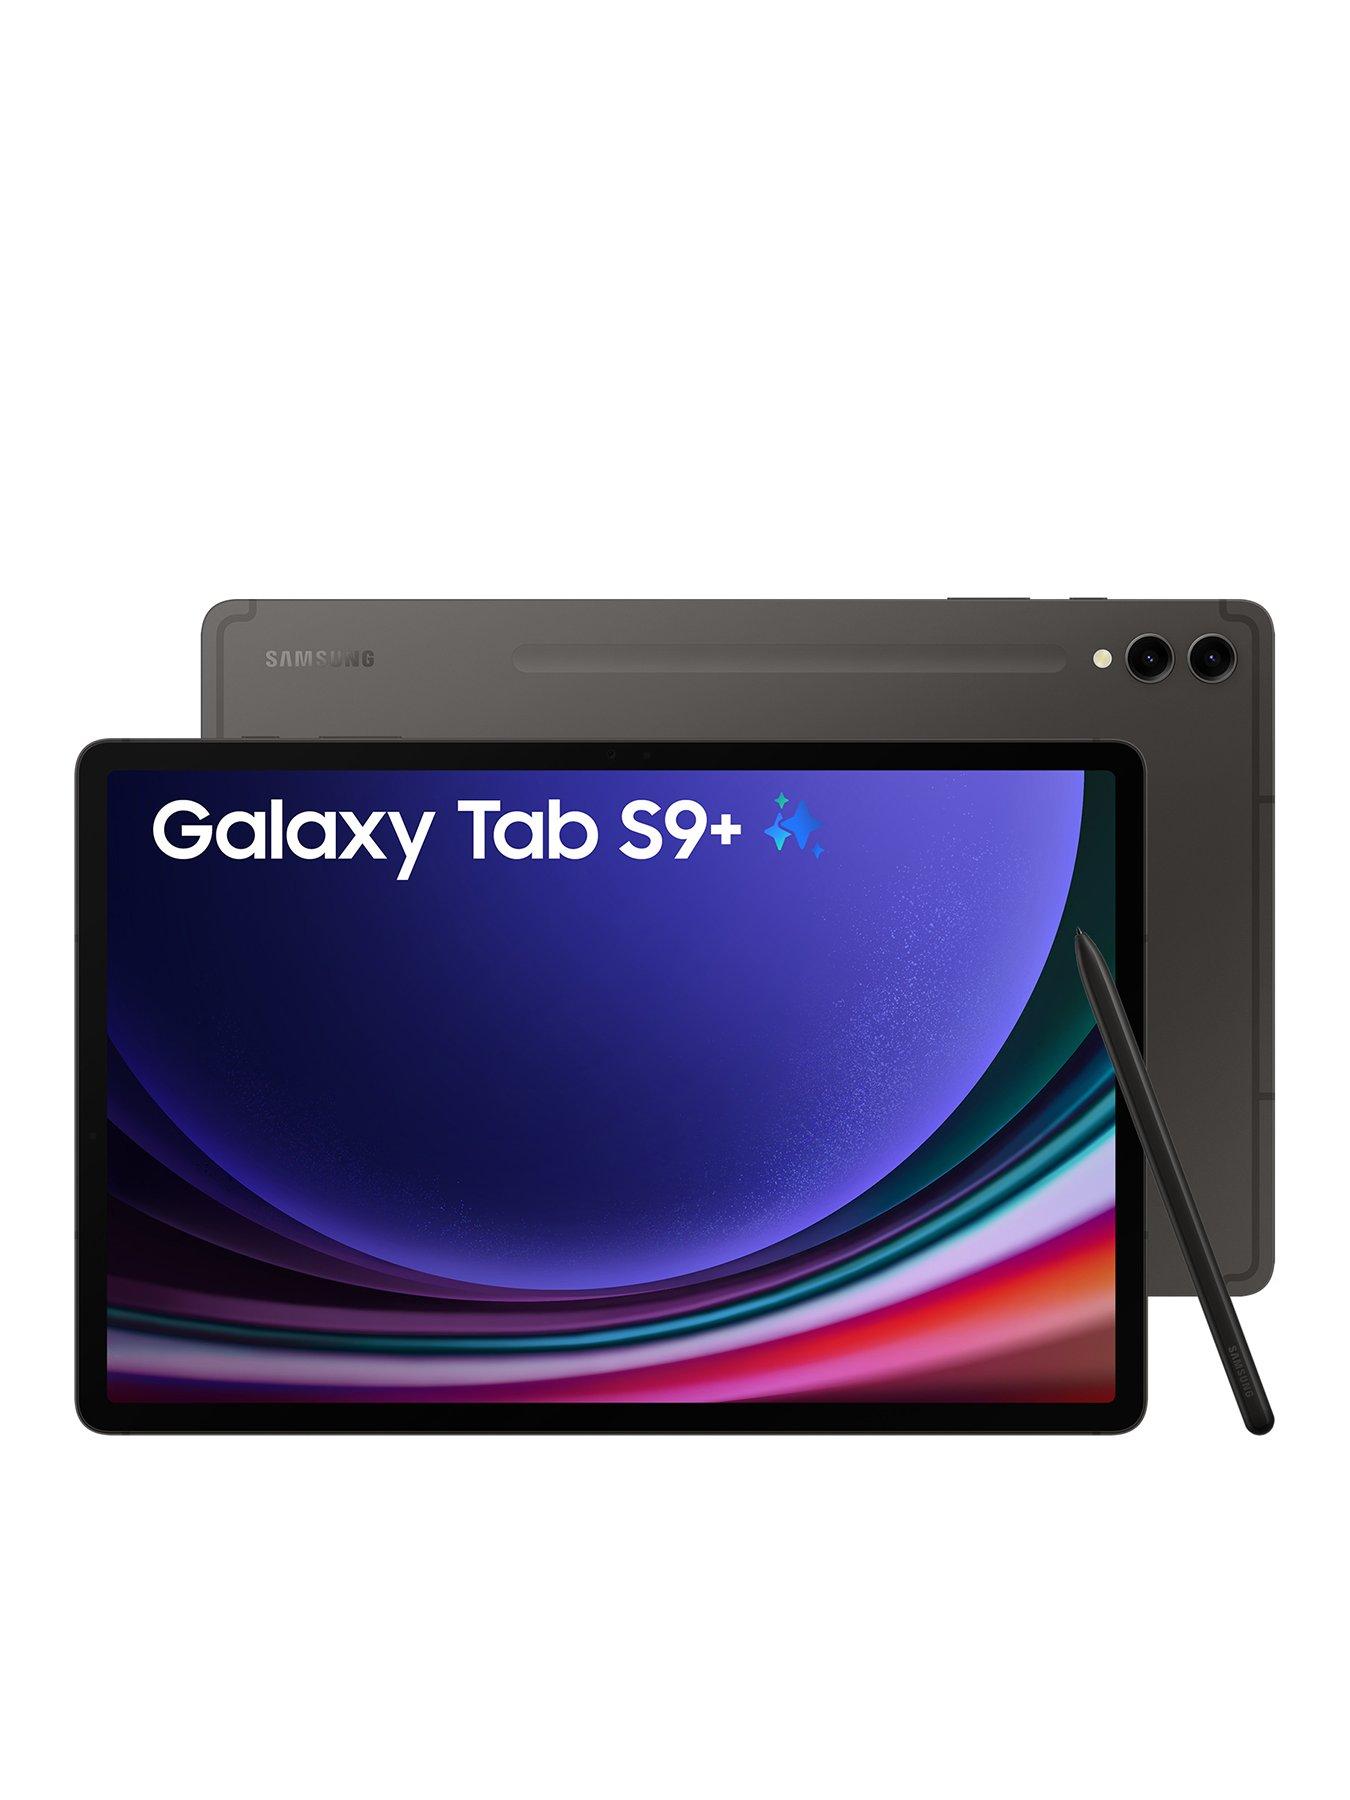 Samsung Galaxy Tab S9: Dream Tablets for Content Creators, Movie